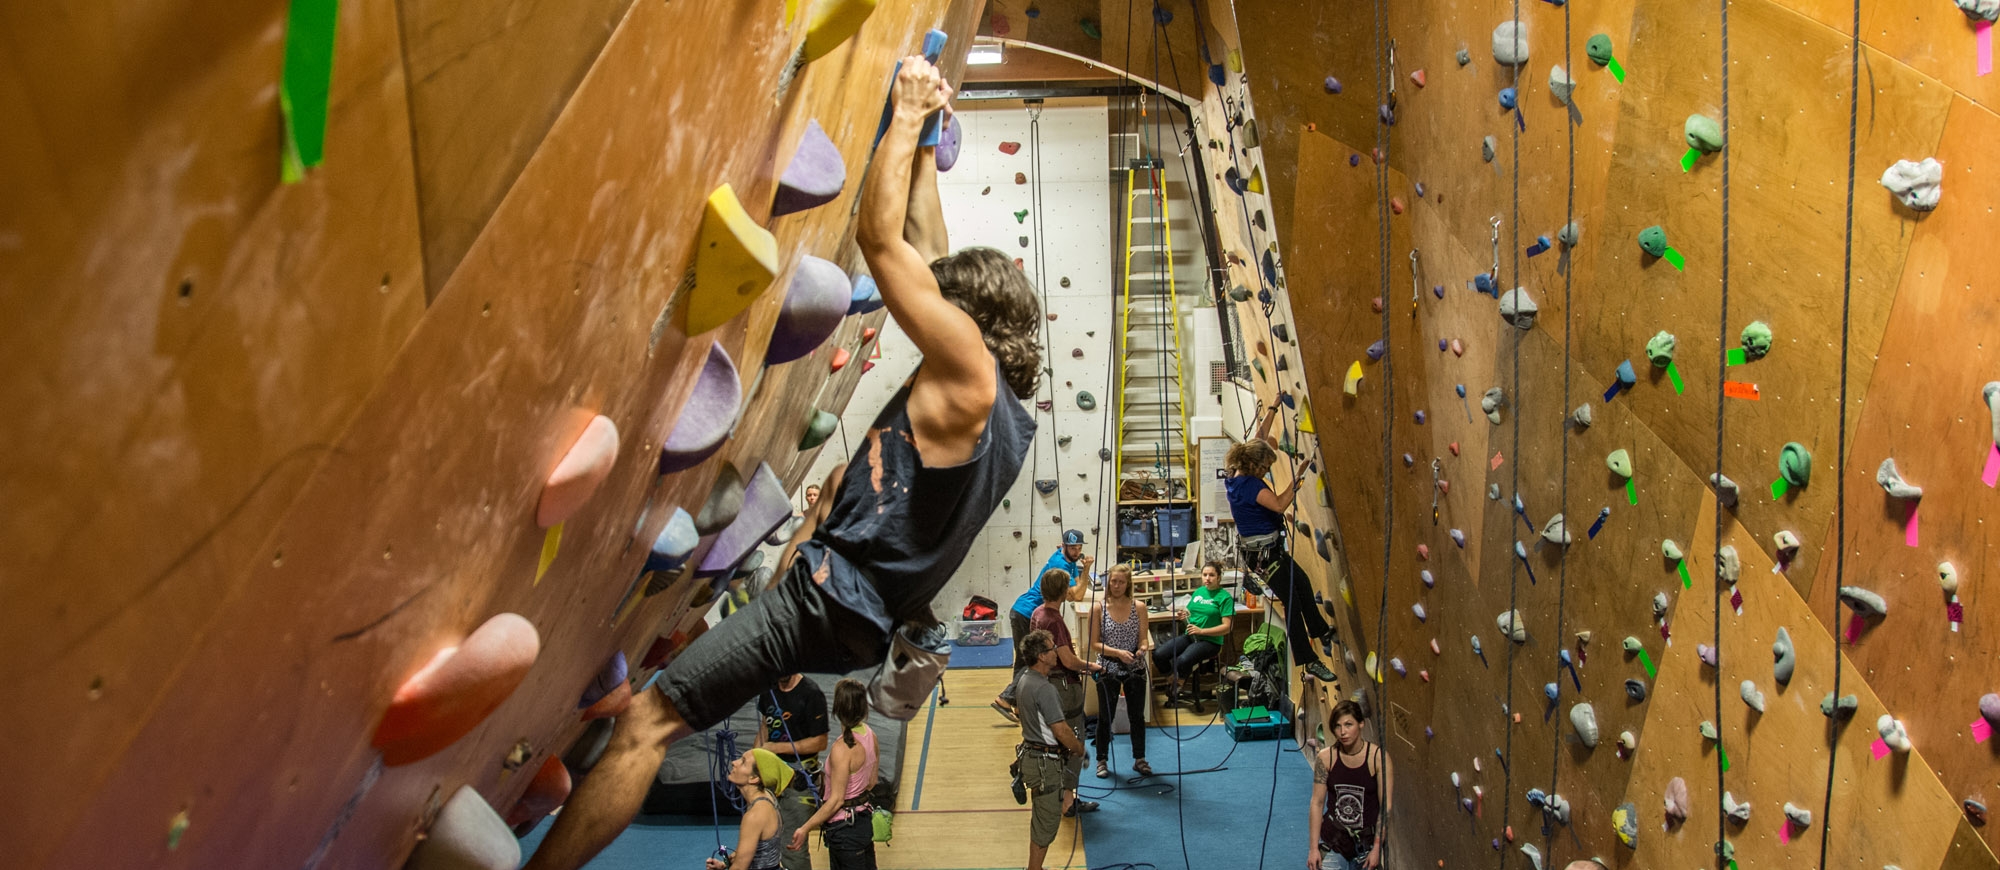 A rock climber at the CUBE indoor climbing centre in Nelson.